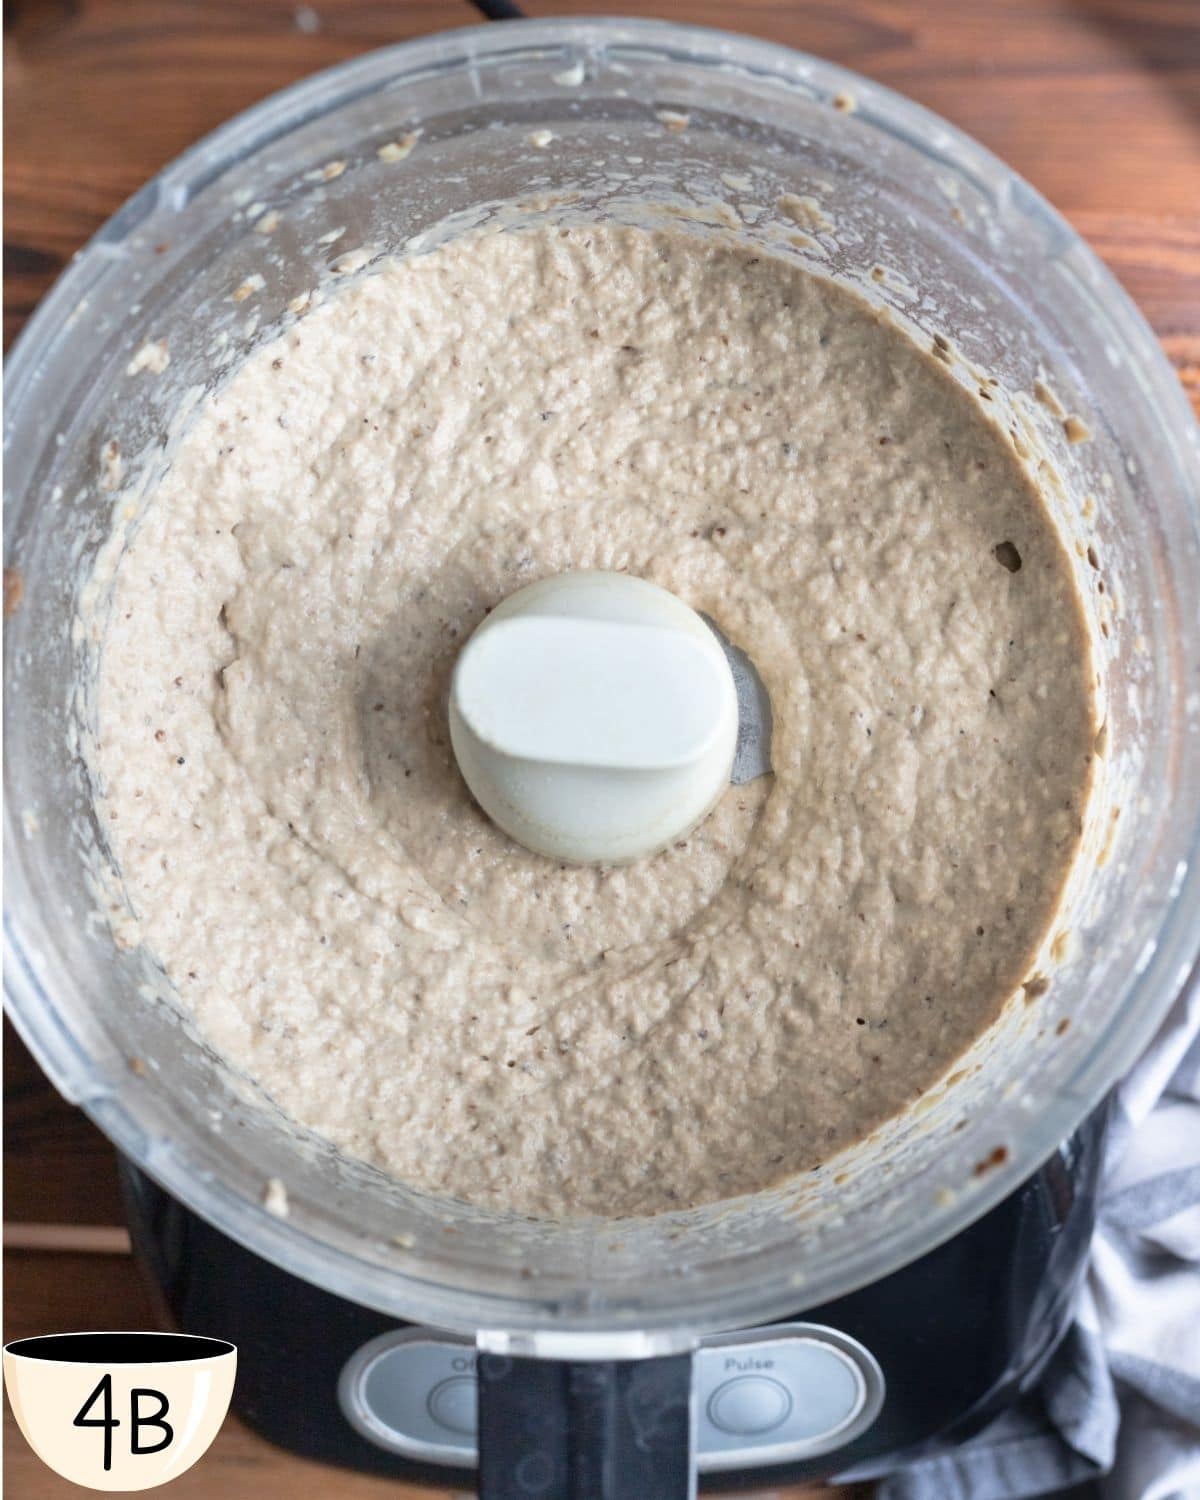 A food processor with a creamy blended eggplant dip recipe ready to be eaten.